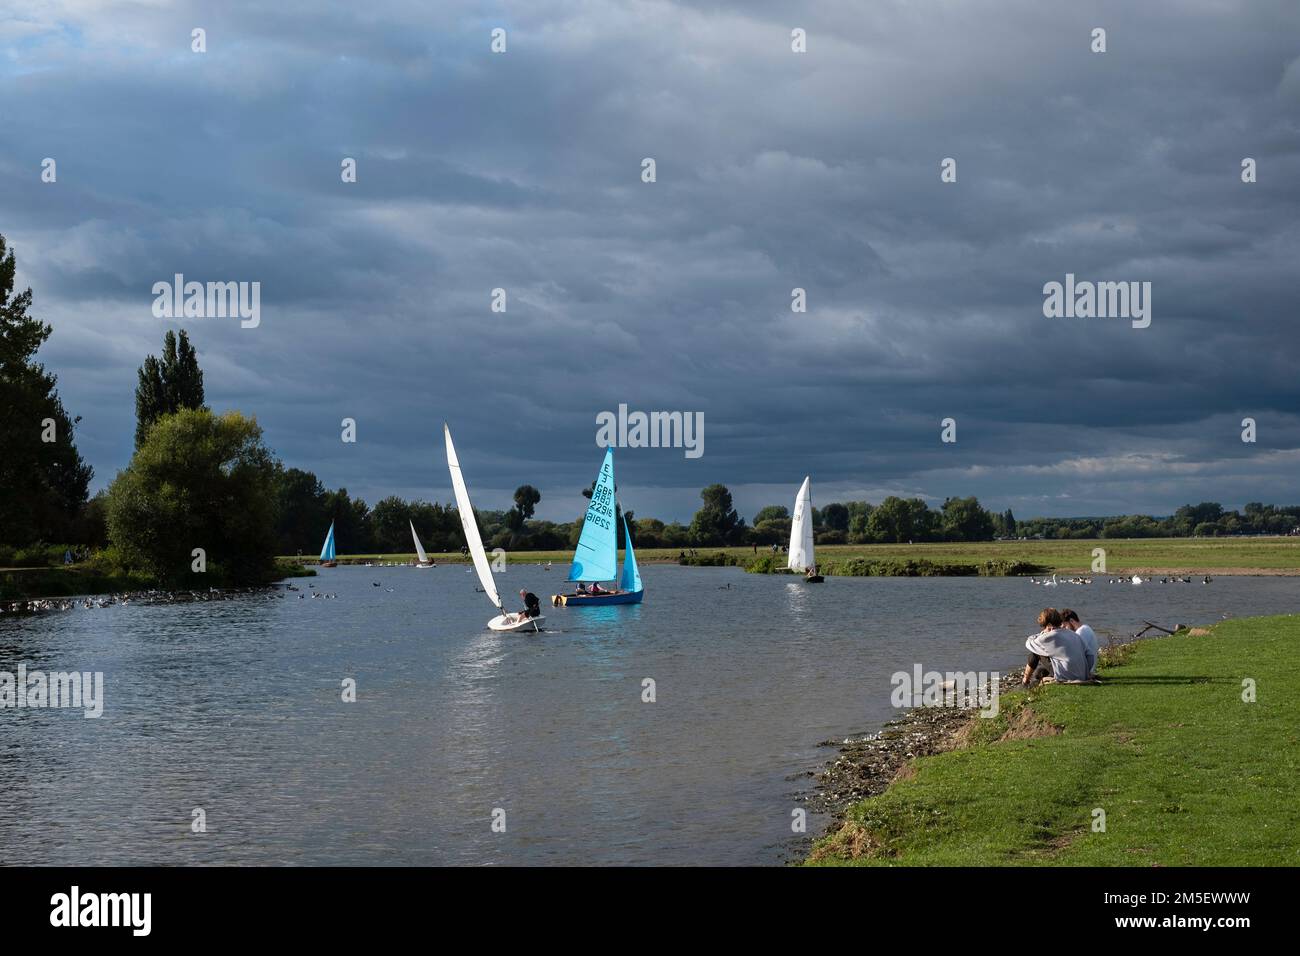 Learning to sail, River Thames, Oxfordshire, United Kingdom Stock Photo